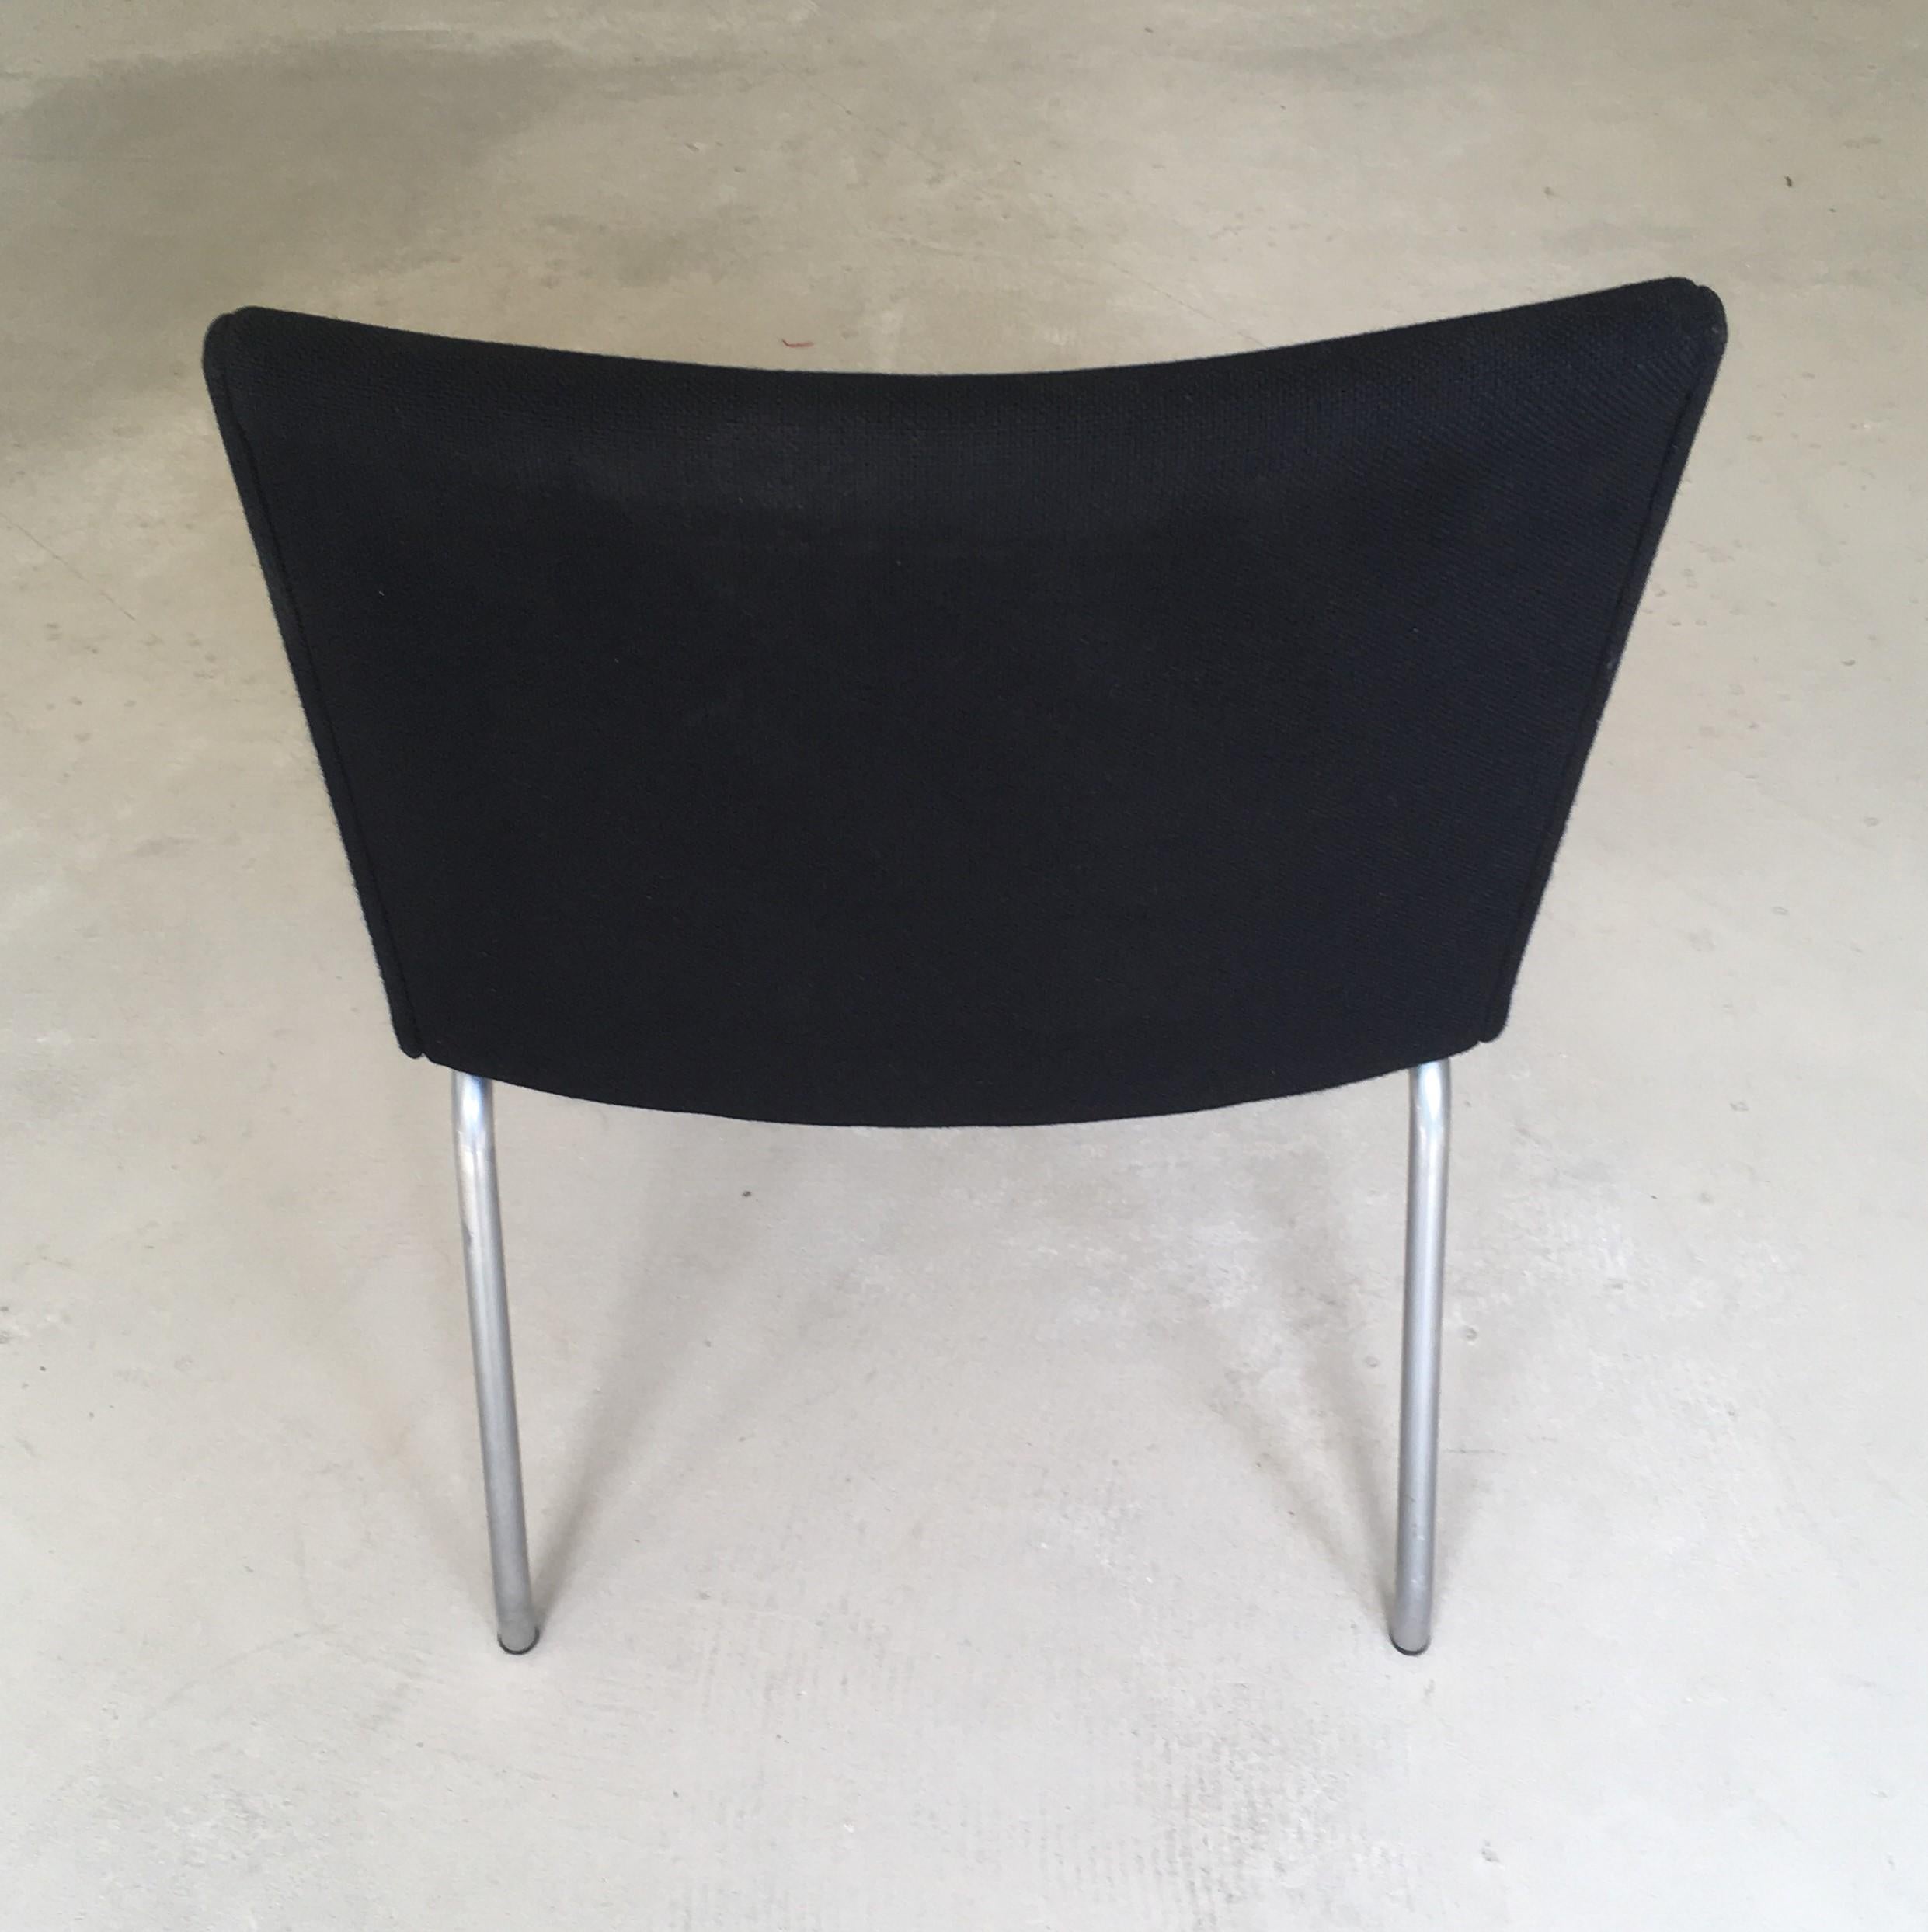 Mid-20th Century 1960s Danish Hans J. Wegner Airport Chair Reupholstered in Black Fabric For Sale